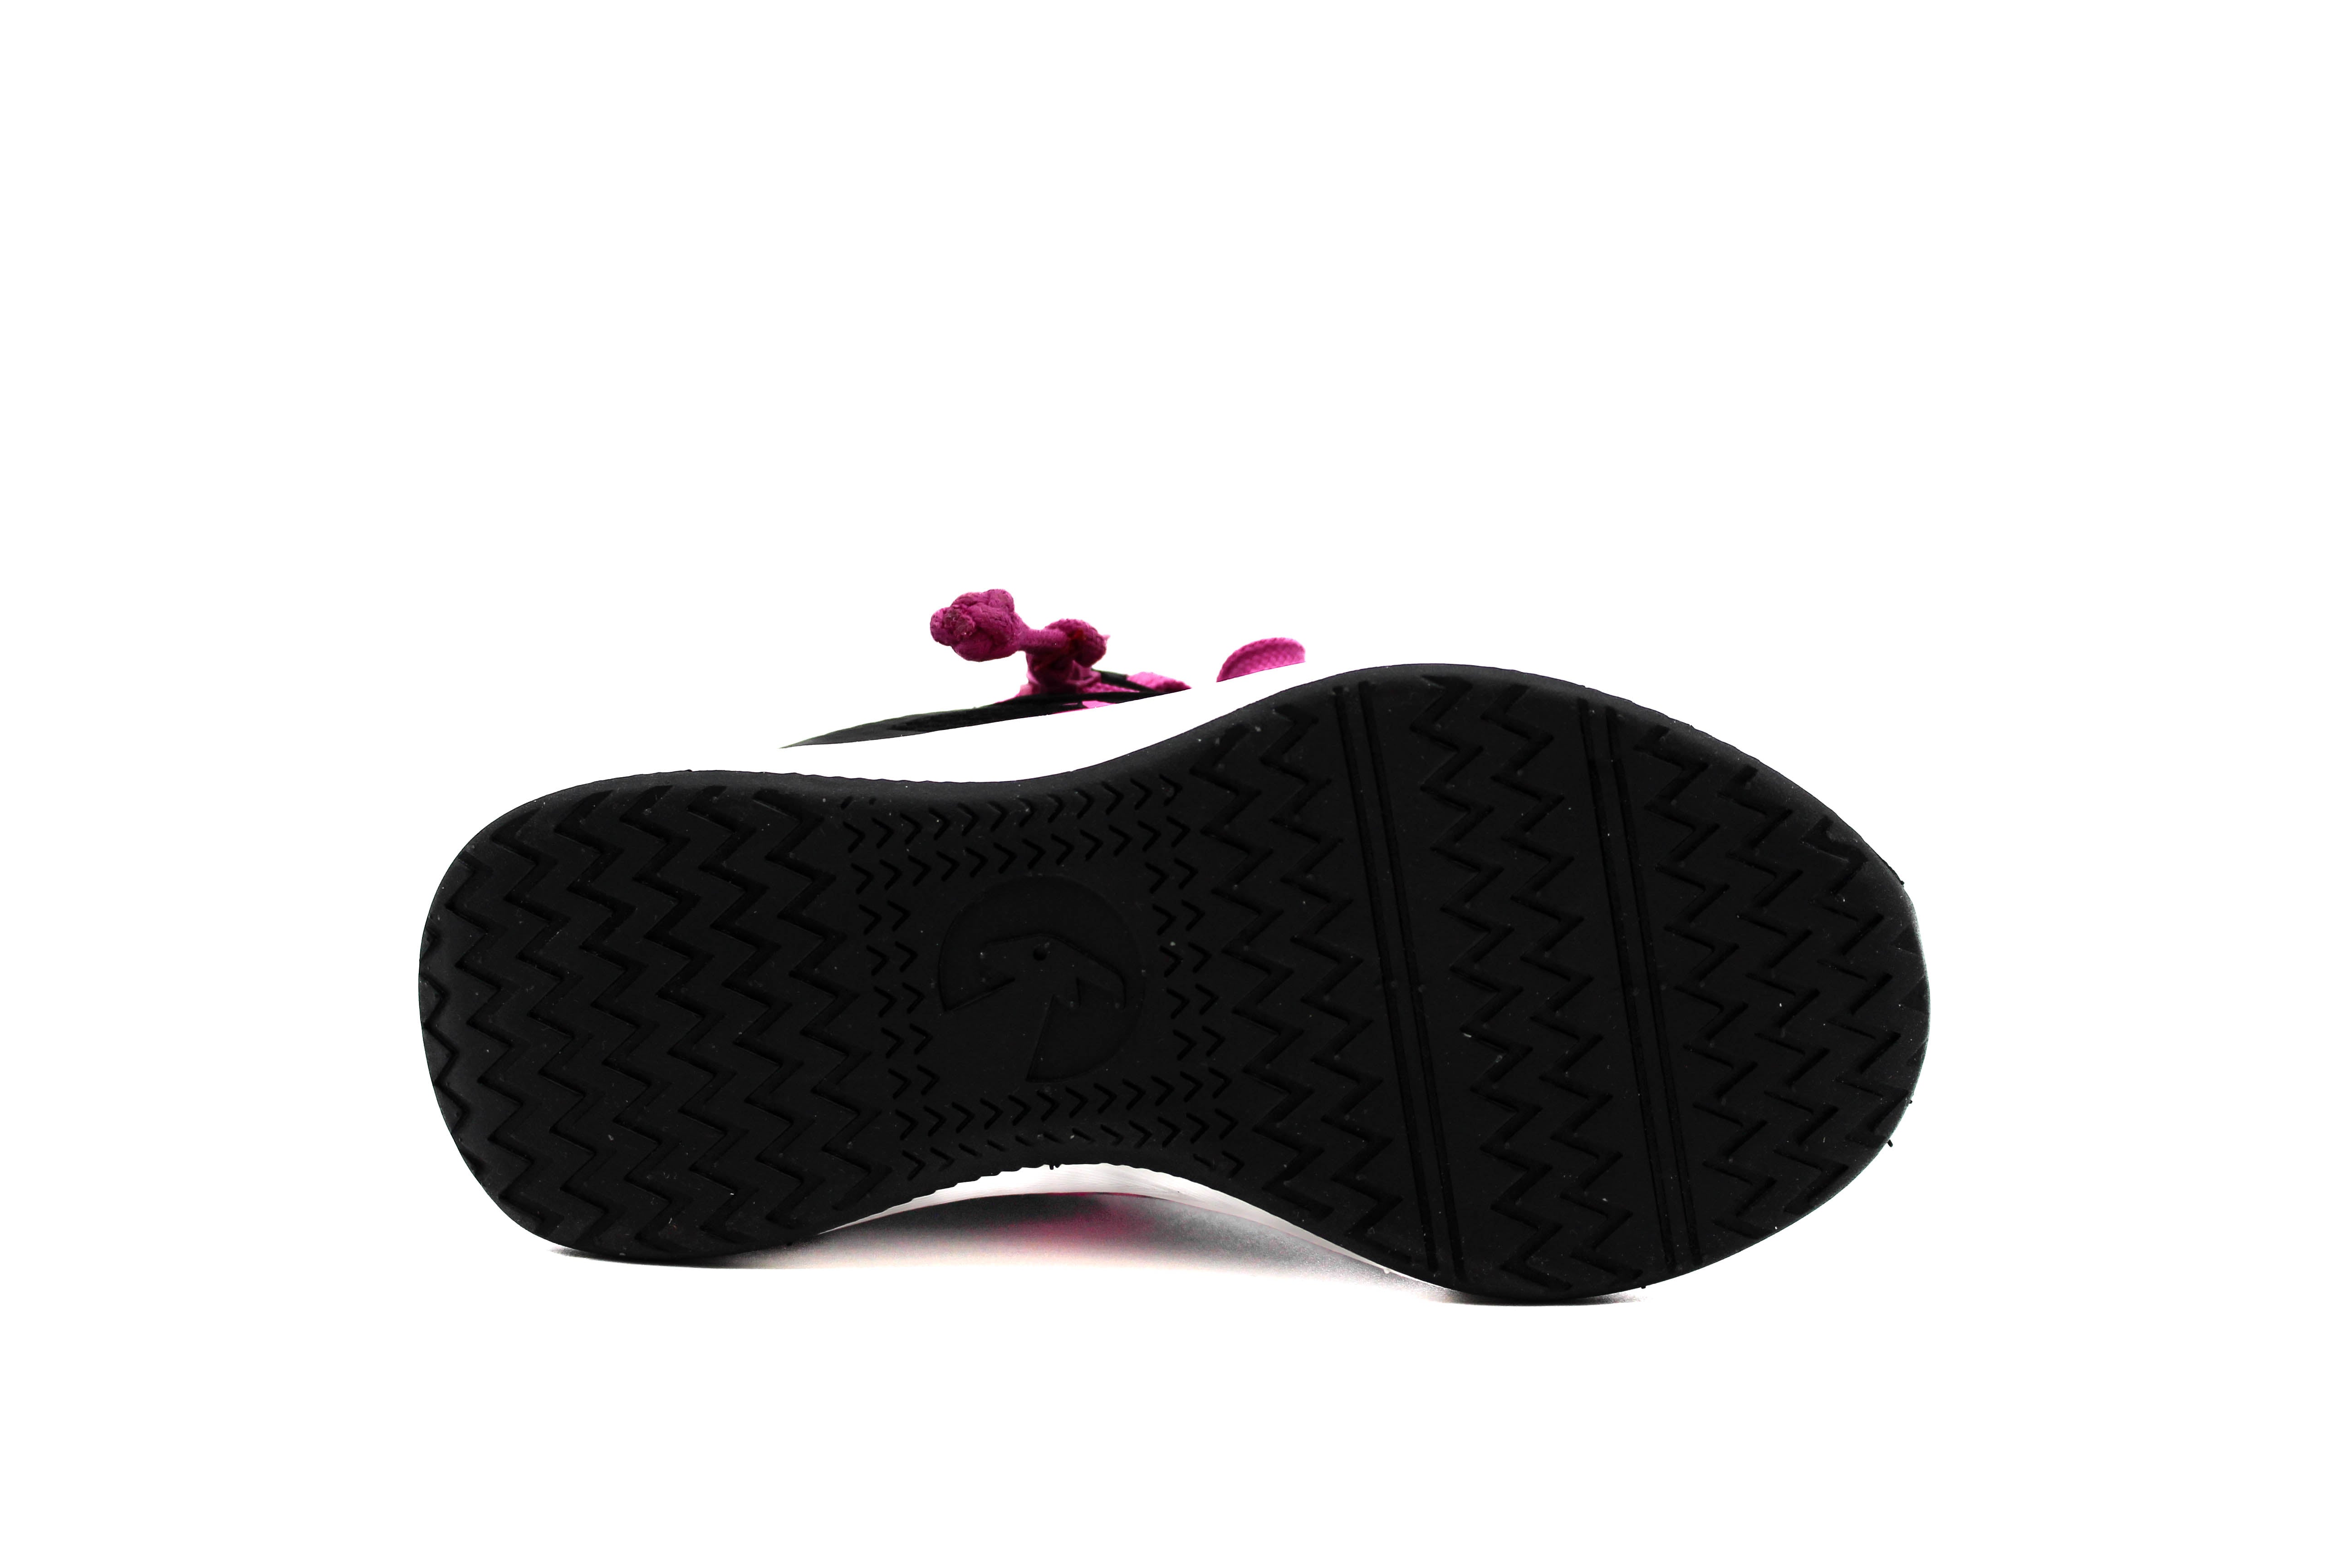 BILLY Black/Pink Sport Inclusion One Athletic Sneakers